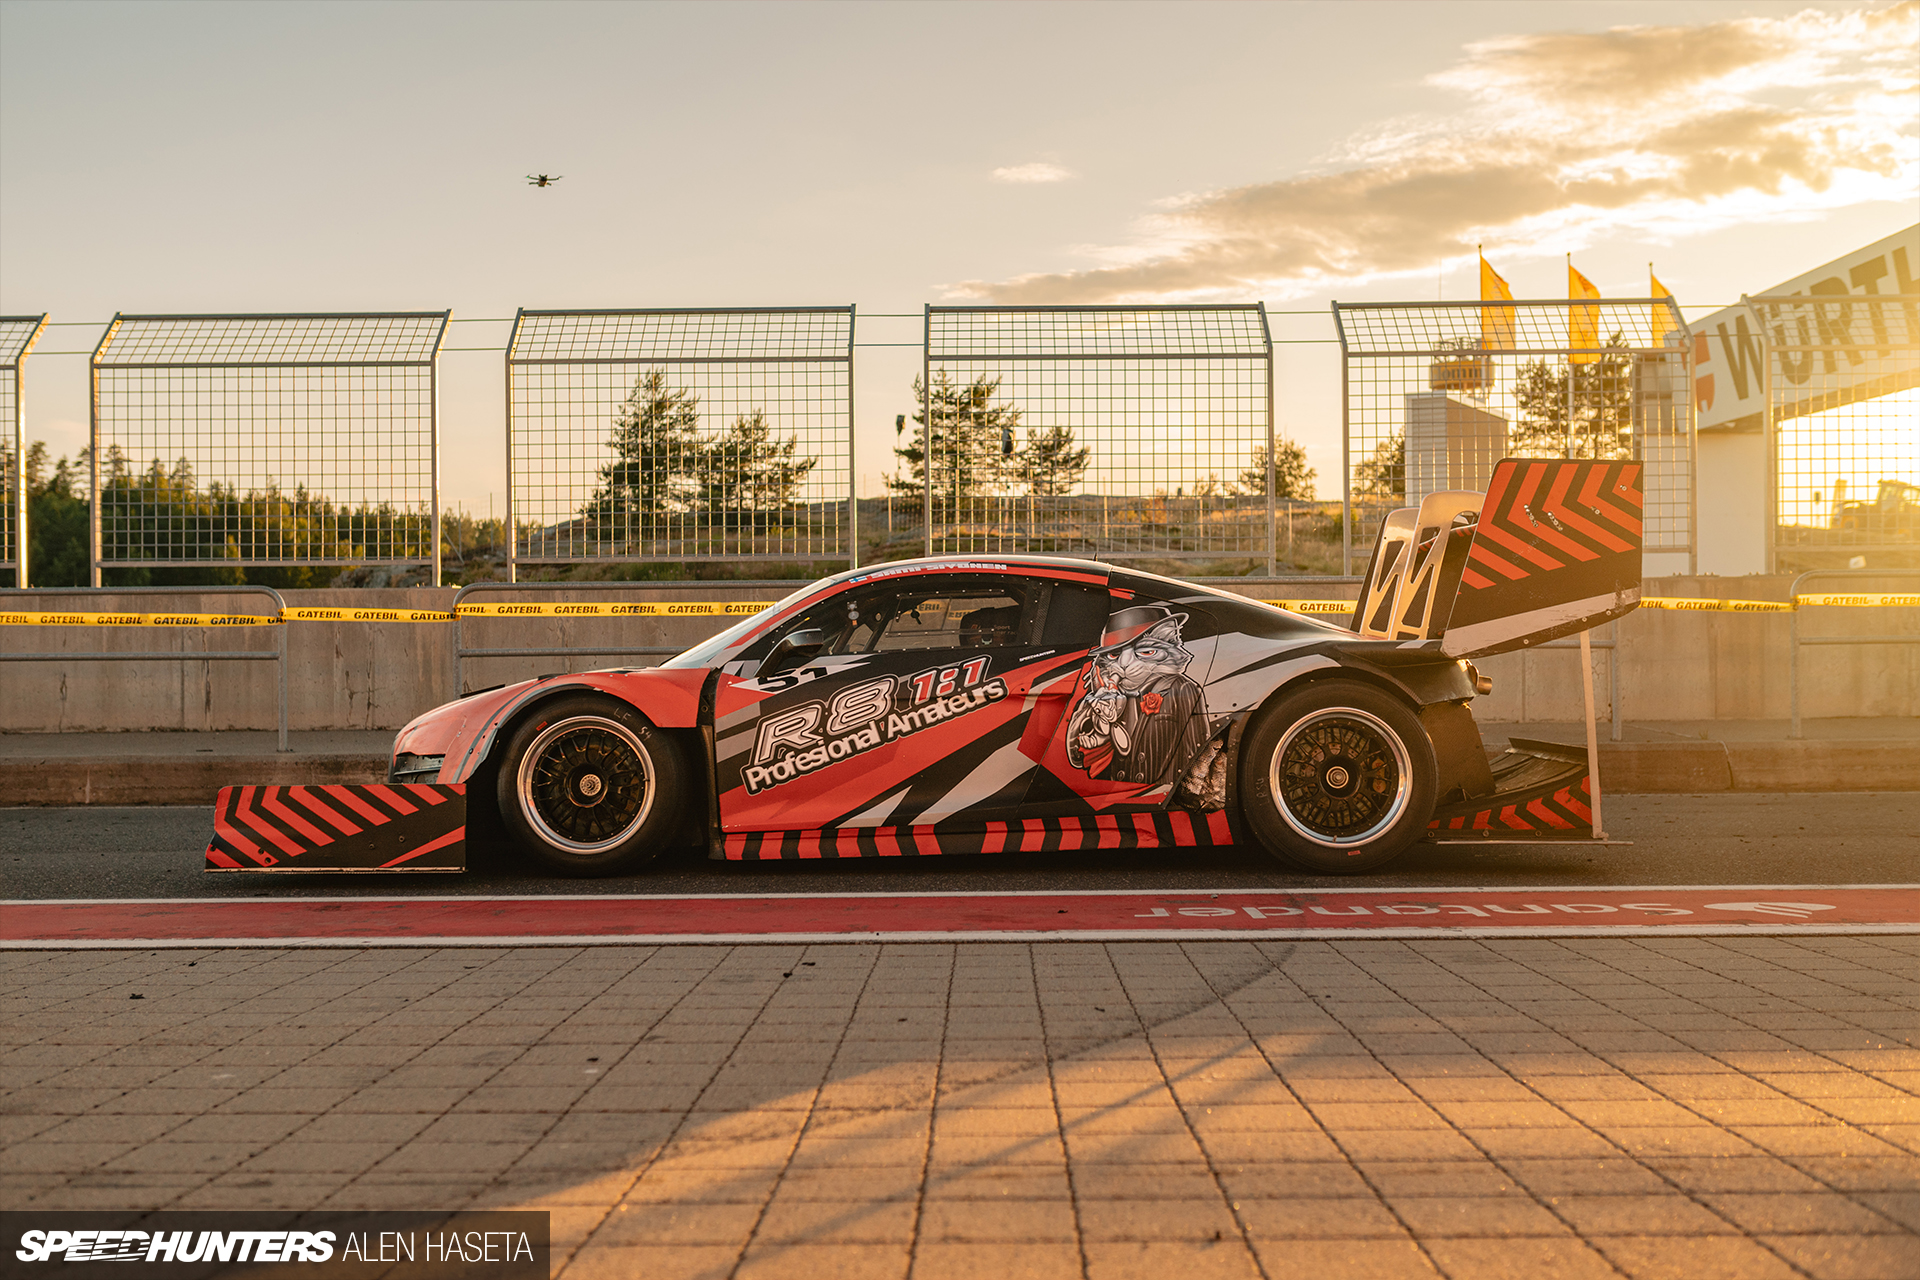 time-attack, team fat cat, r8 1:1, r8, professional amateurs, gatebil, finland, car spotlight, audi, claws out: the audi r8 1:1 time attack monster